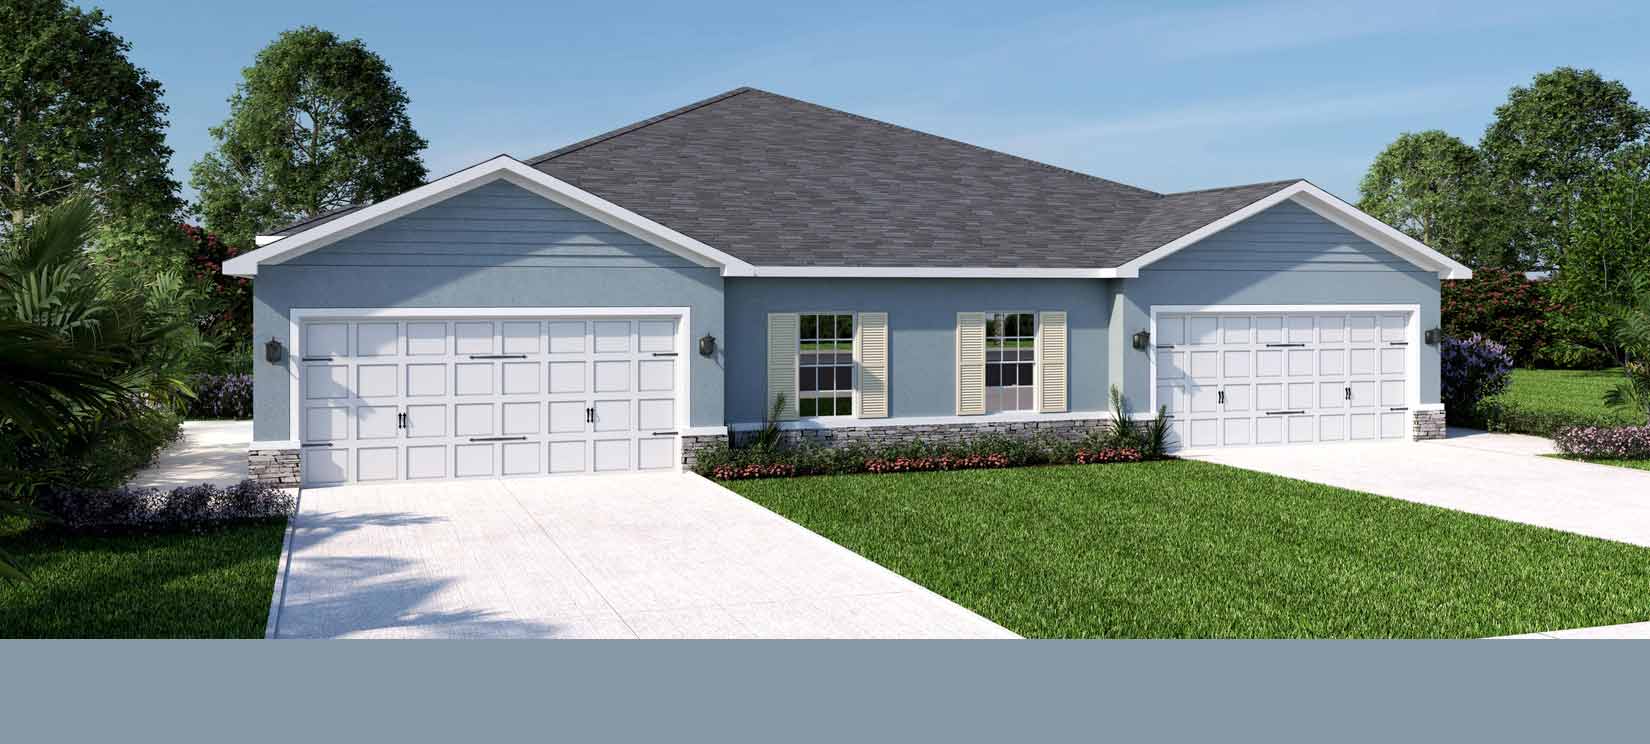 Ryan Homes Winterhaven Paired Villas Model open daily at West Port in Port Charlotte